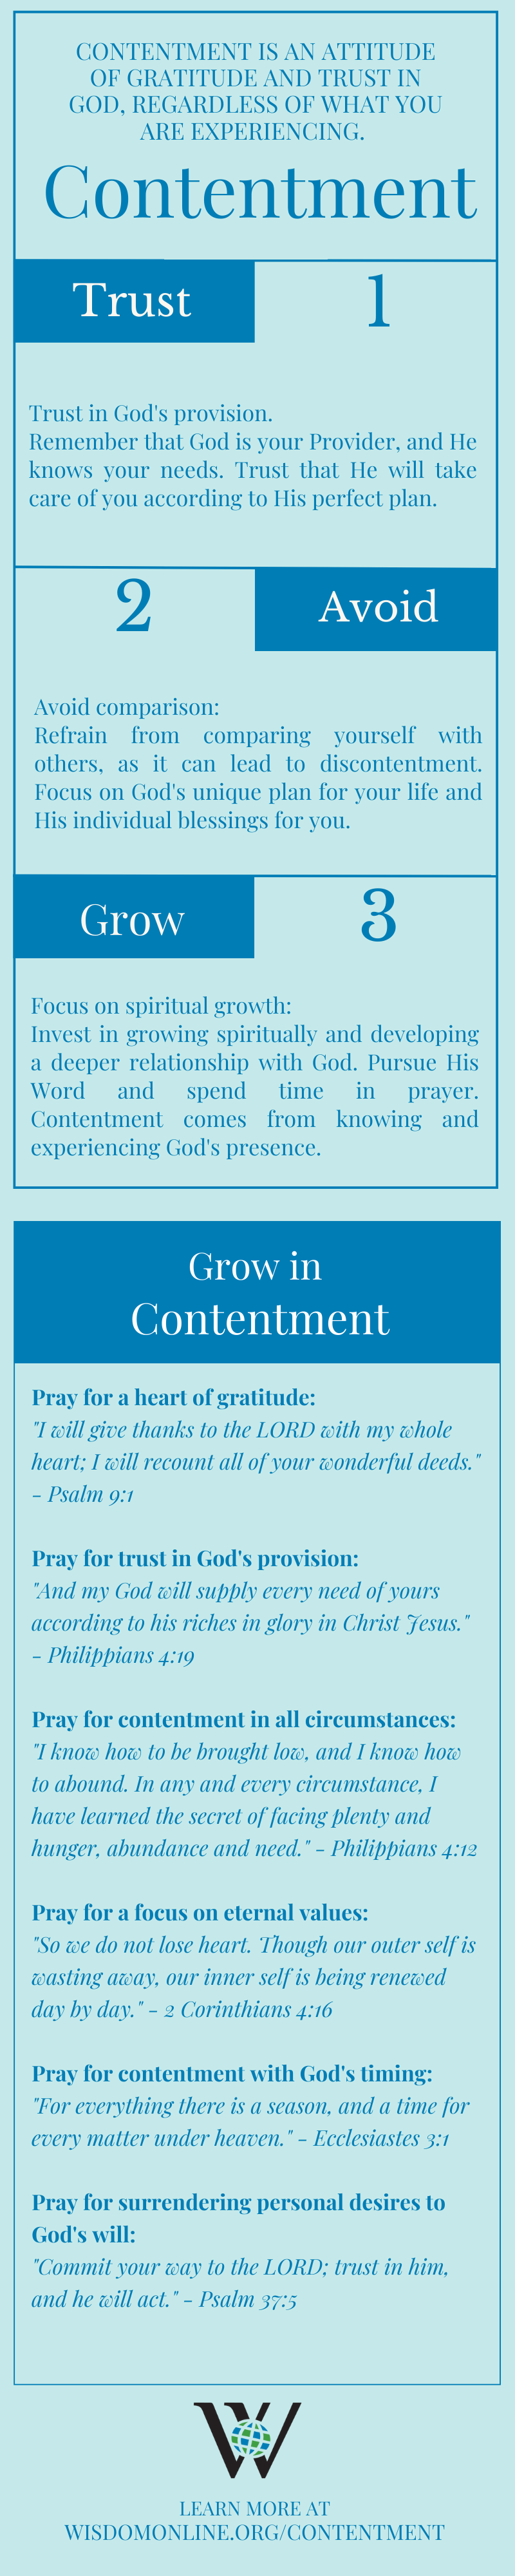 Infographic on the Biblical characteristic of Contentment